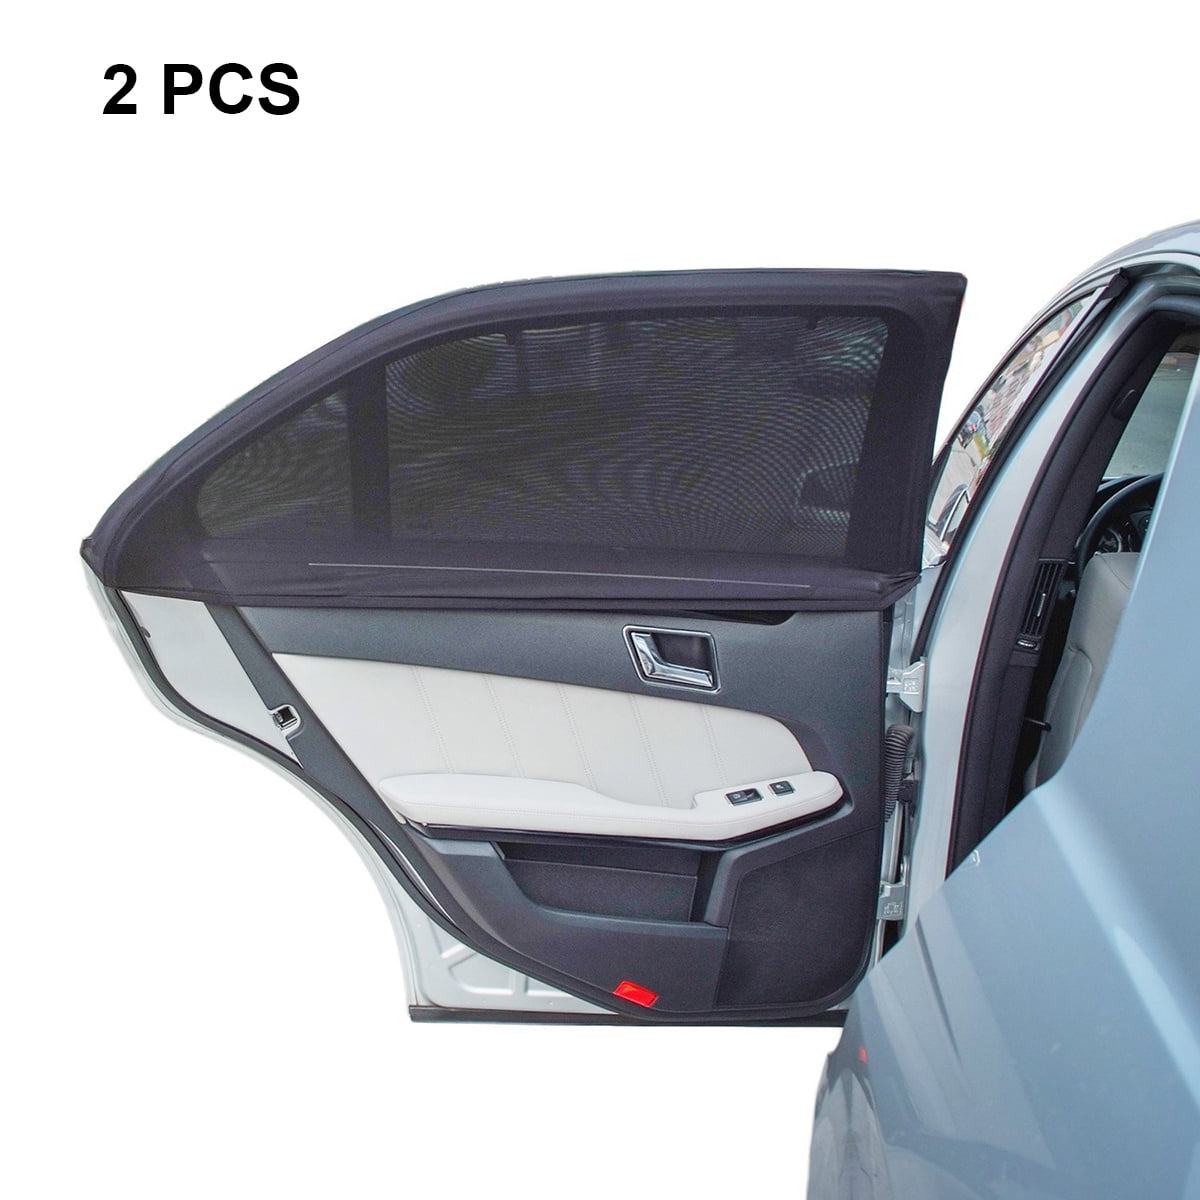 39X21 inch 2 Pack Car Window Shades bedee Car Sun Shade Block UV Rays Cover Rear Side Window Car Sun Shades for Baby Universal Fit Stretch Size 